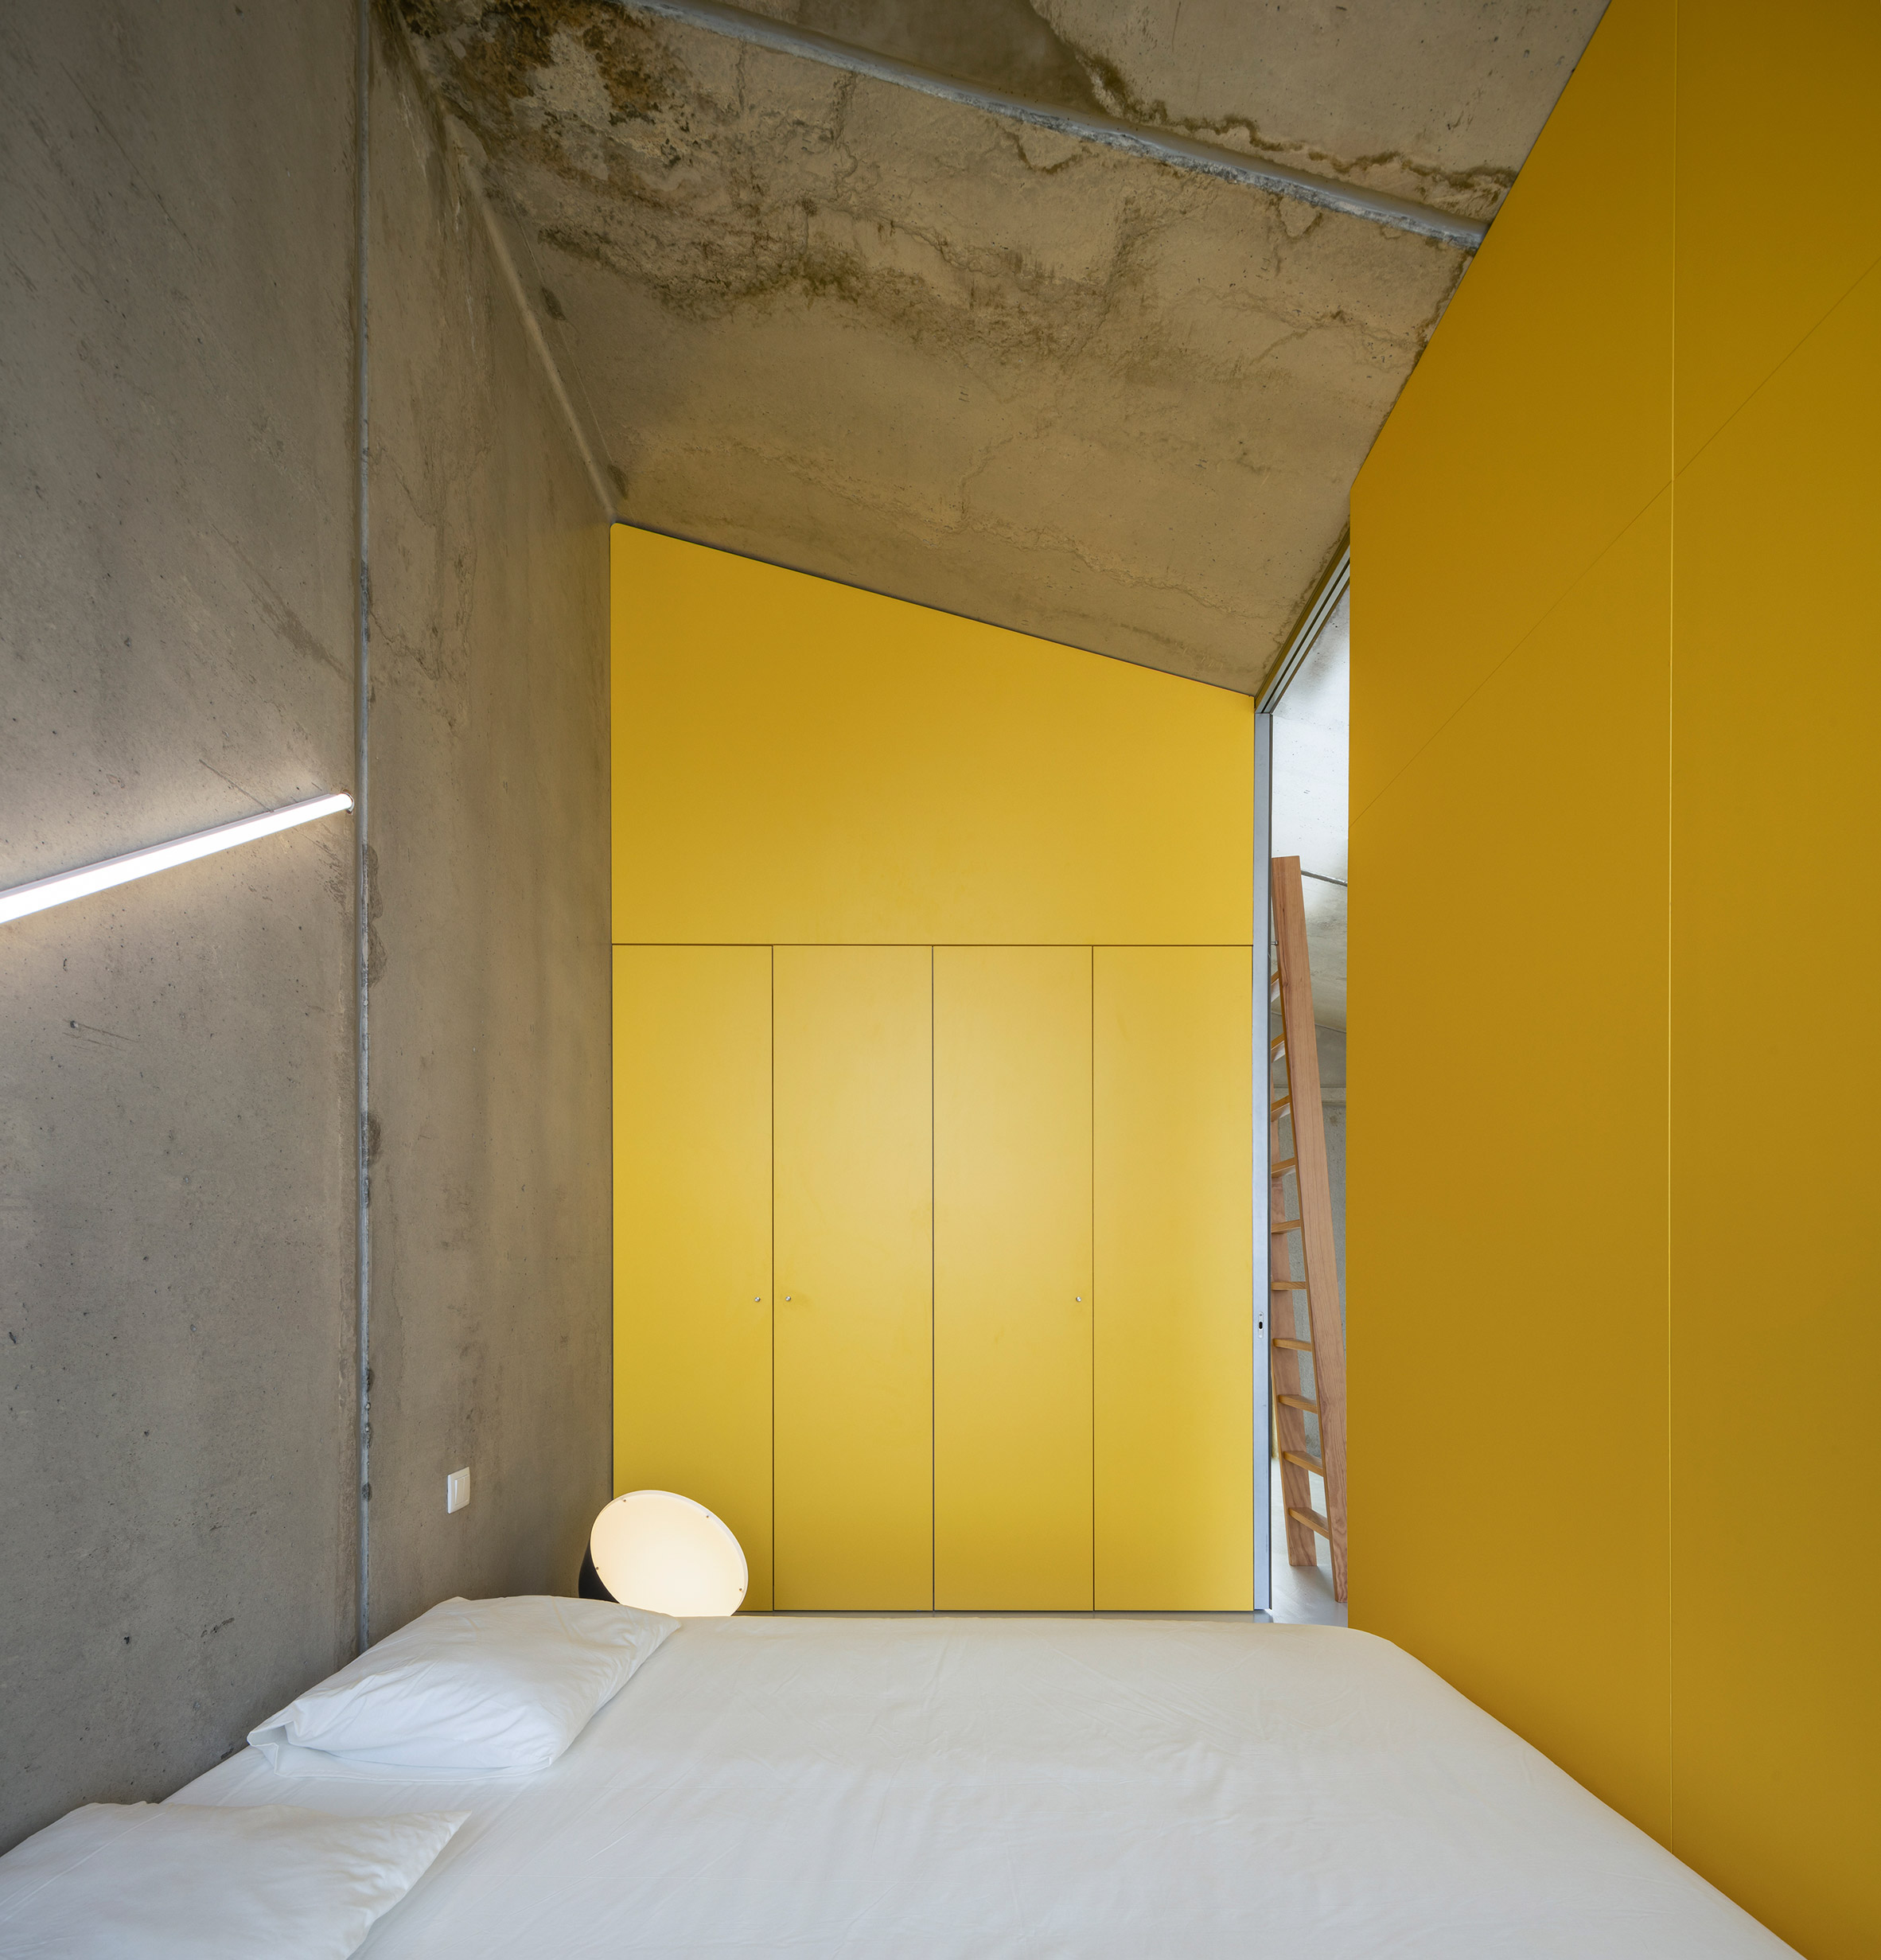 Bedroom of VDC modular prefabricated concrete housing by Summary in Portugal